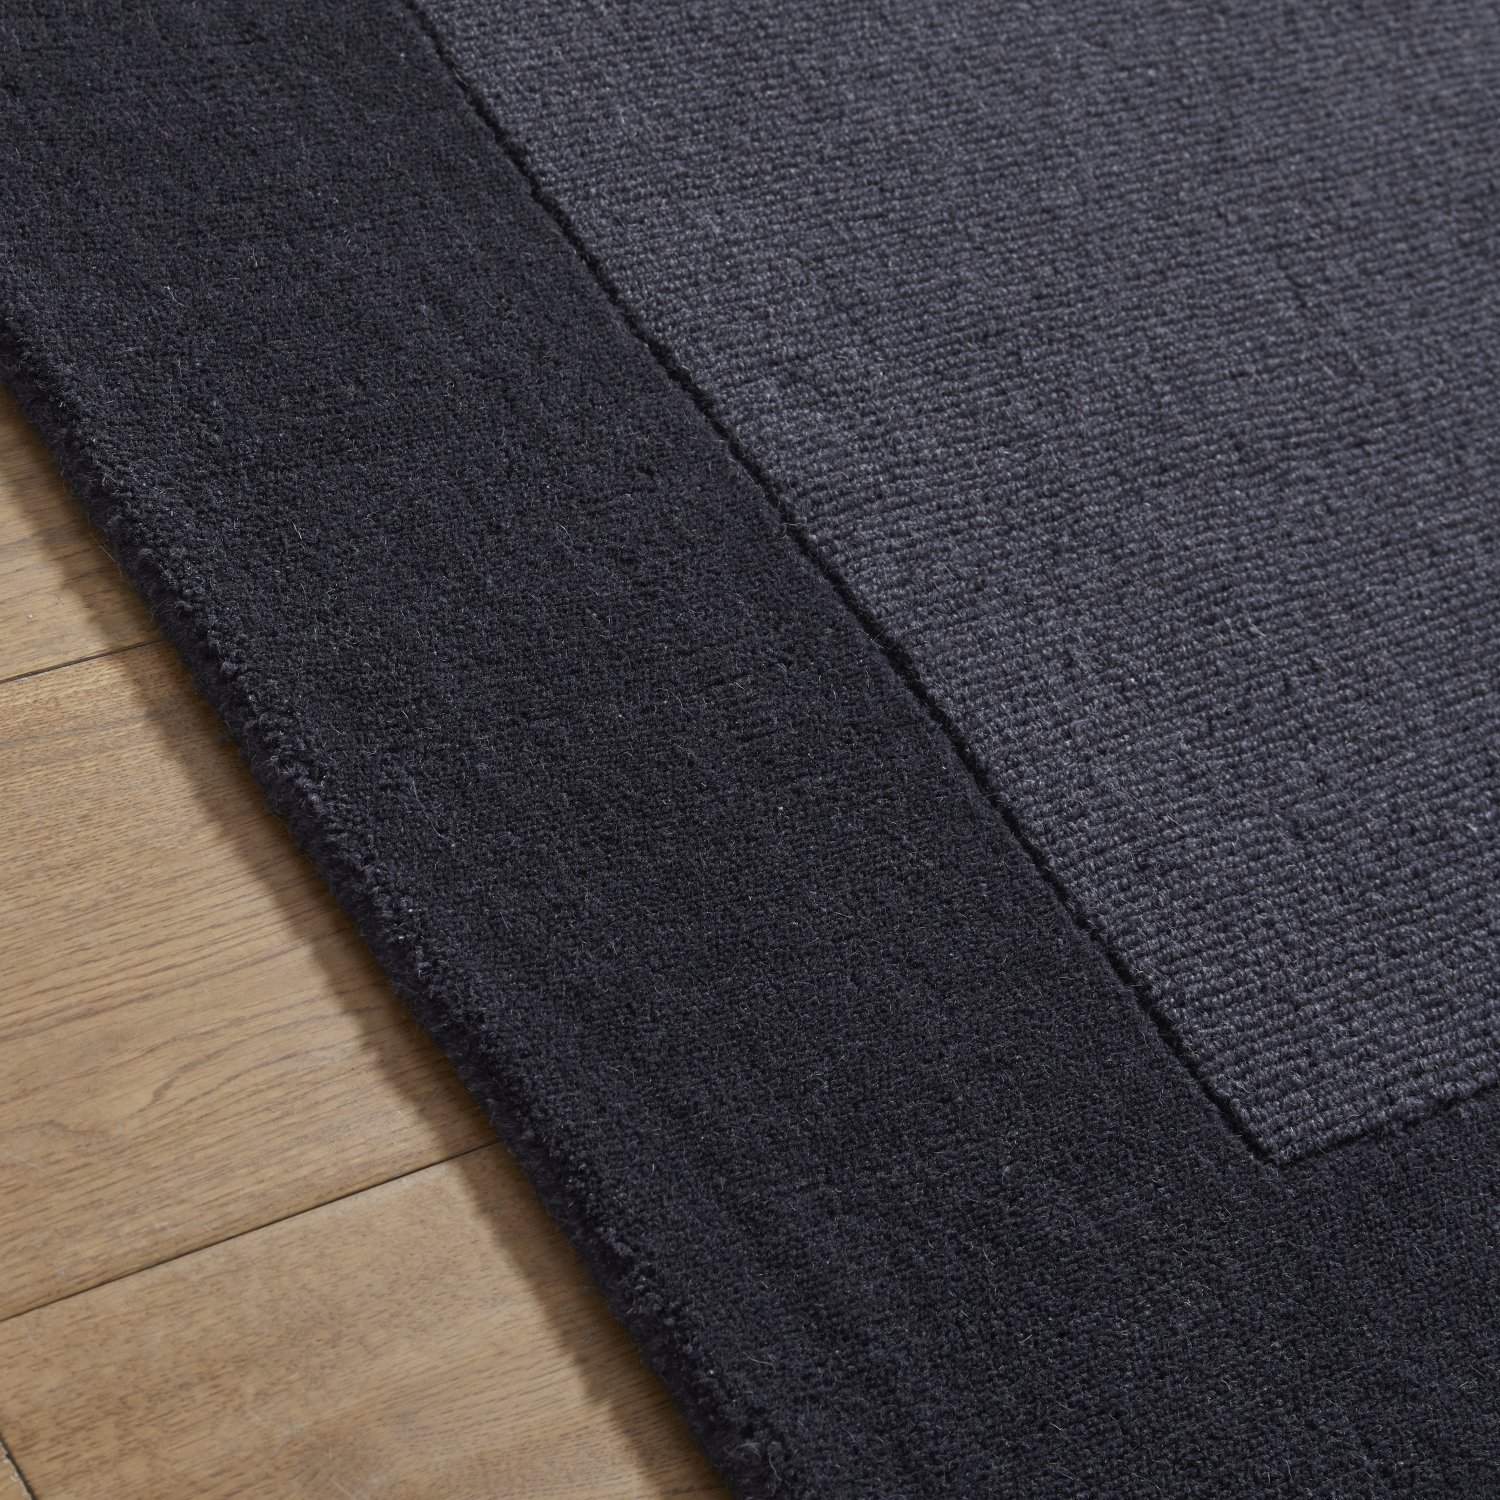 Colours Bordered Wool Runner - Charcoal